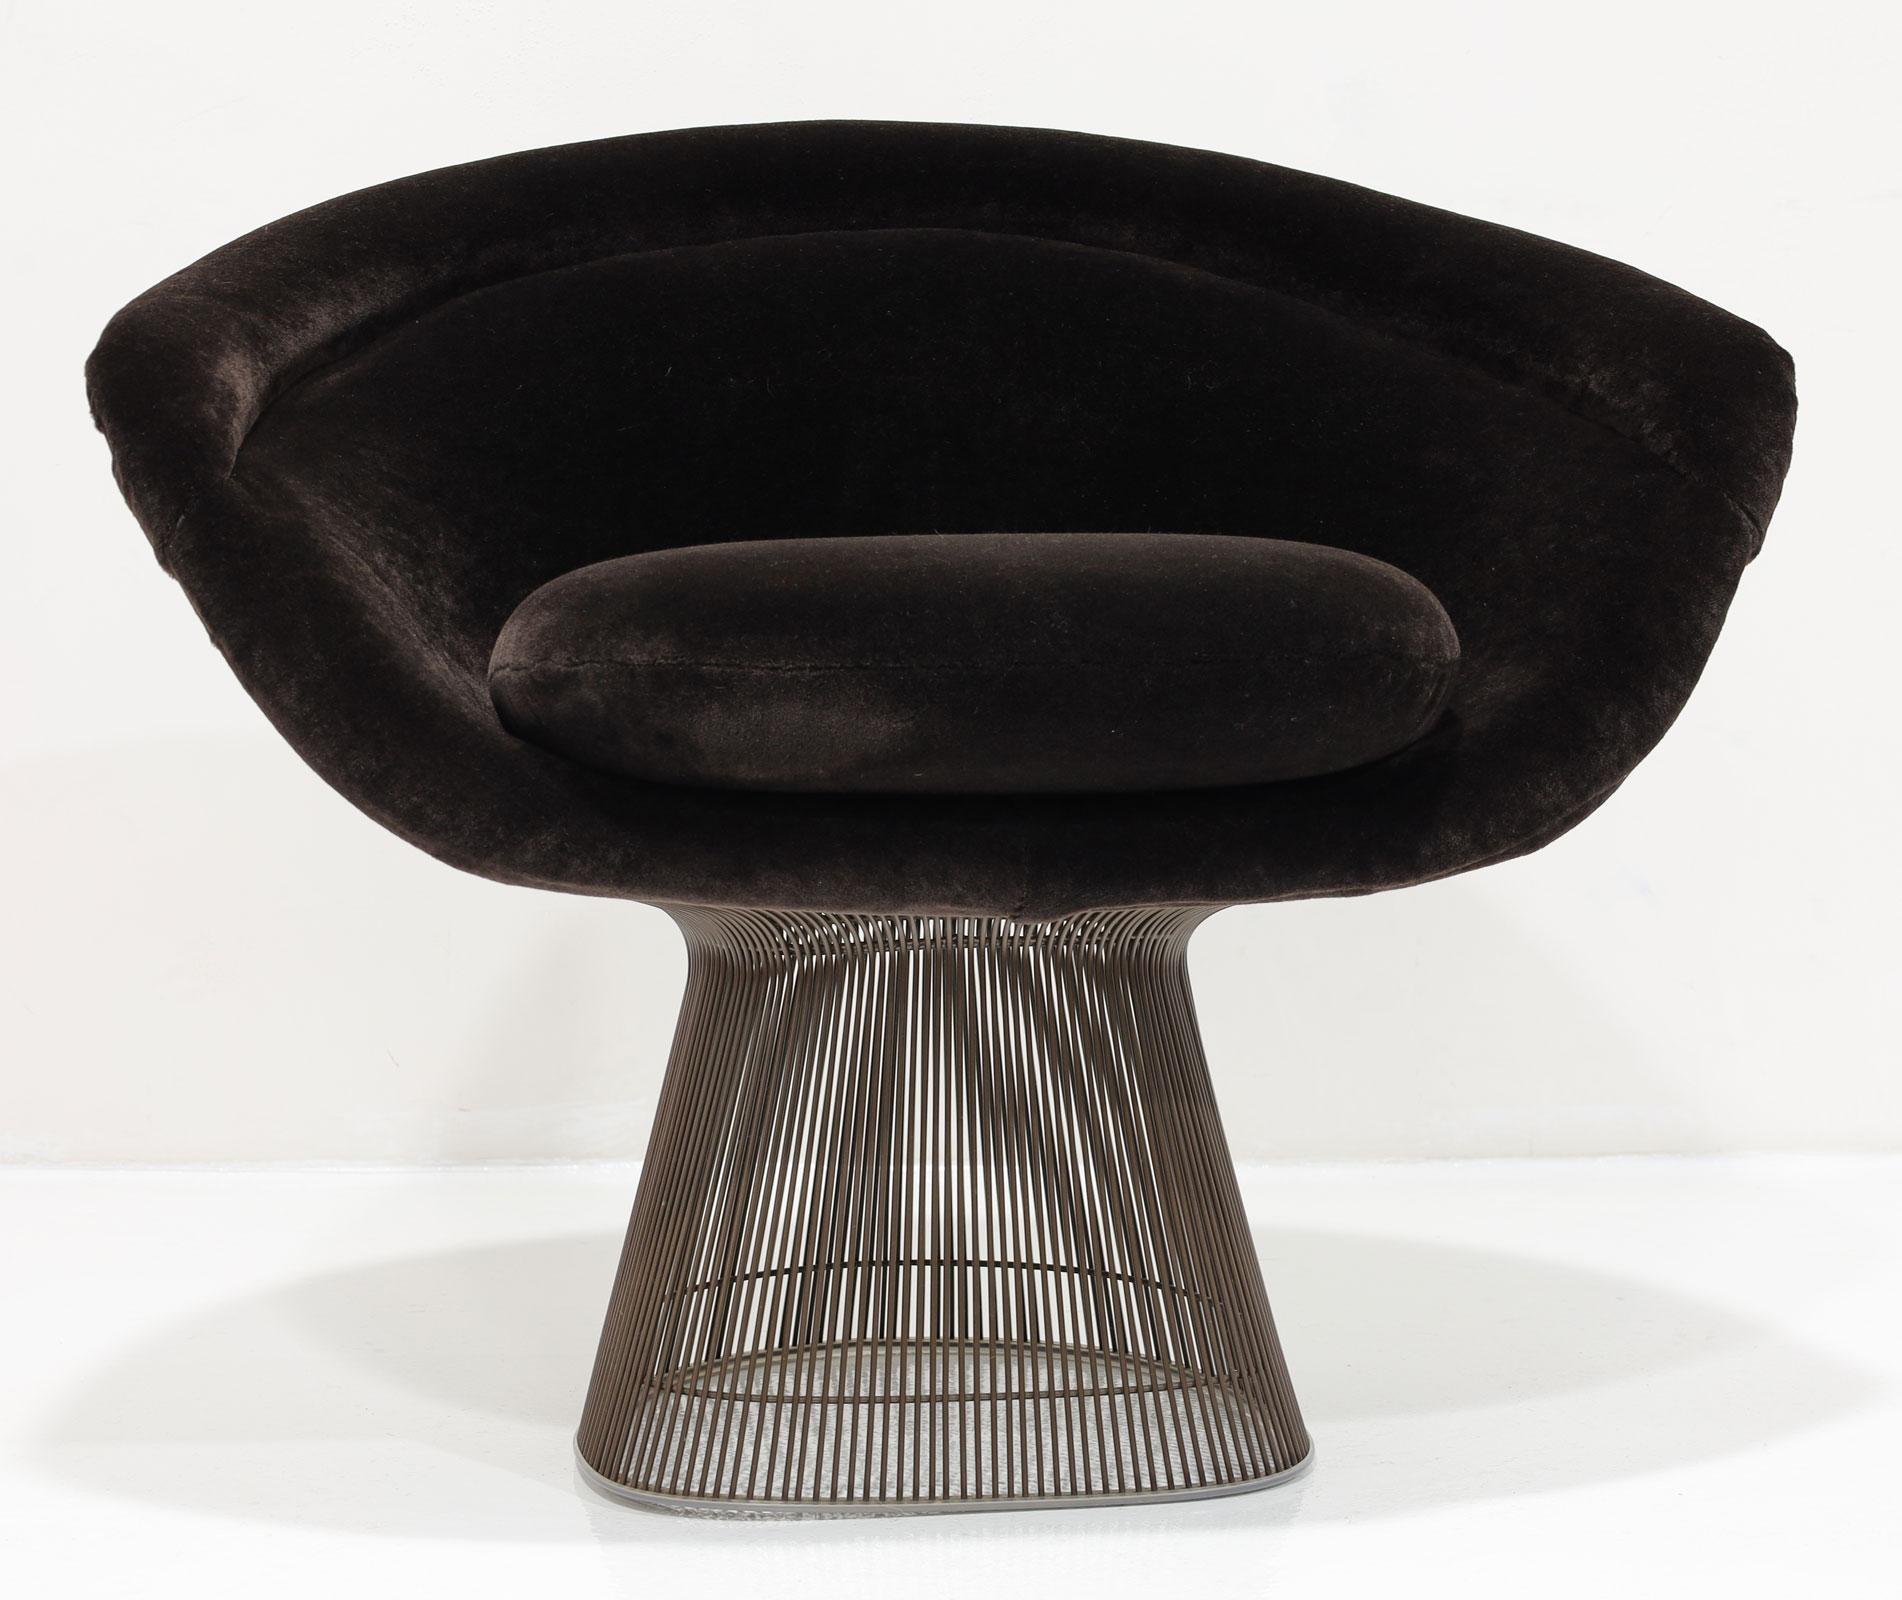 Warren Platner's iconic lounge chair in a monochromatic look. Bronze frame and deep brown lustrous mohair by Holly Hunt Great Plains make this a subtly elegant chair with comfort. 